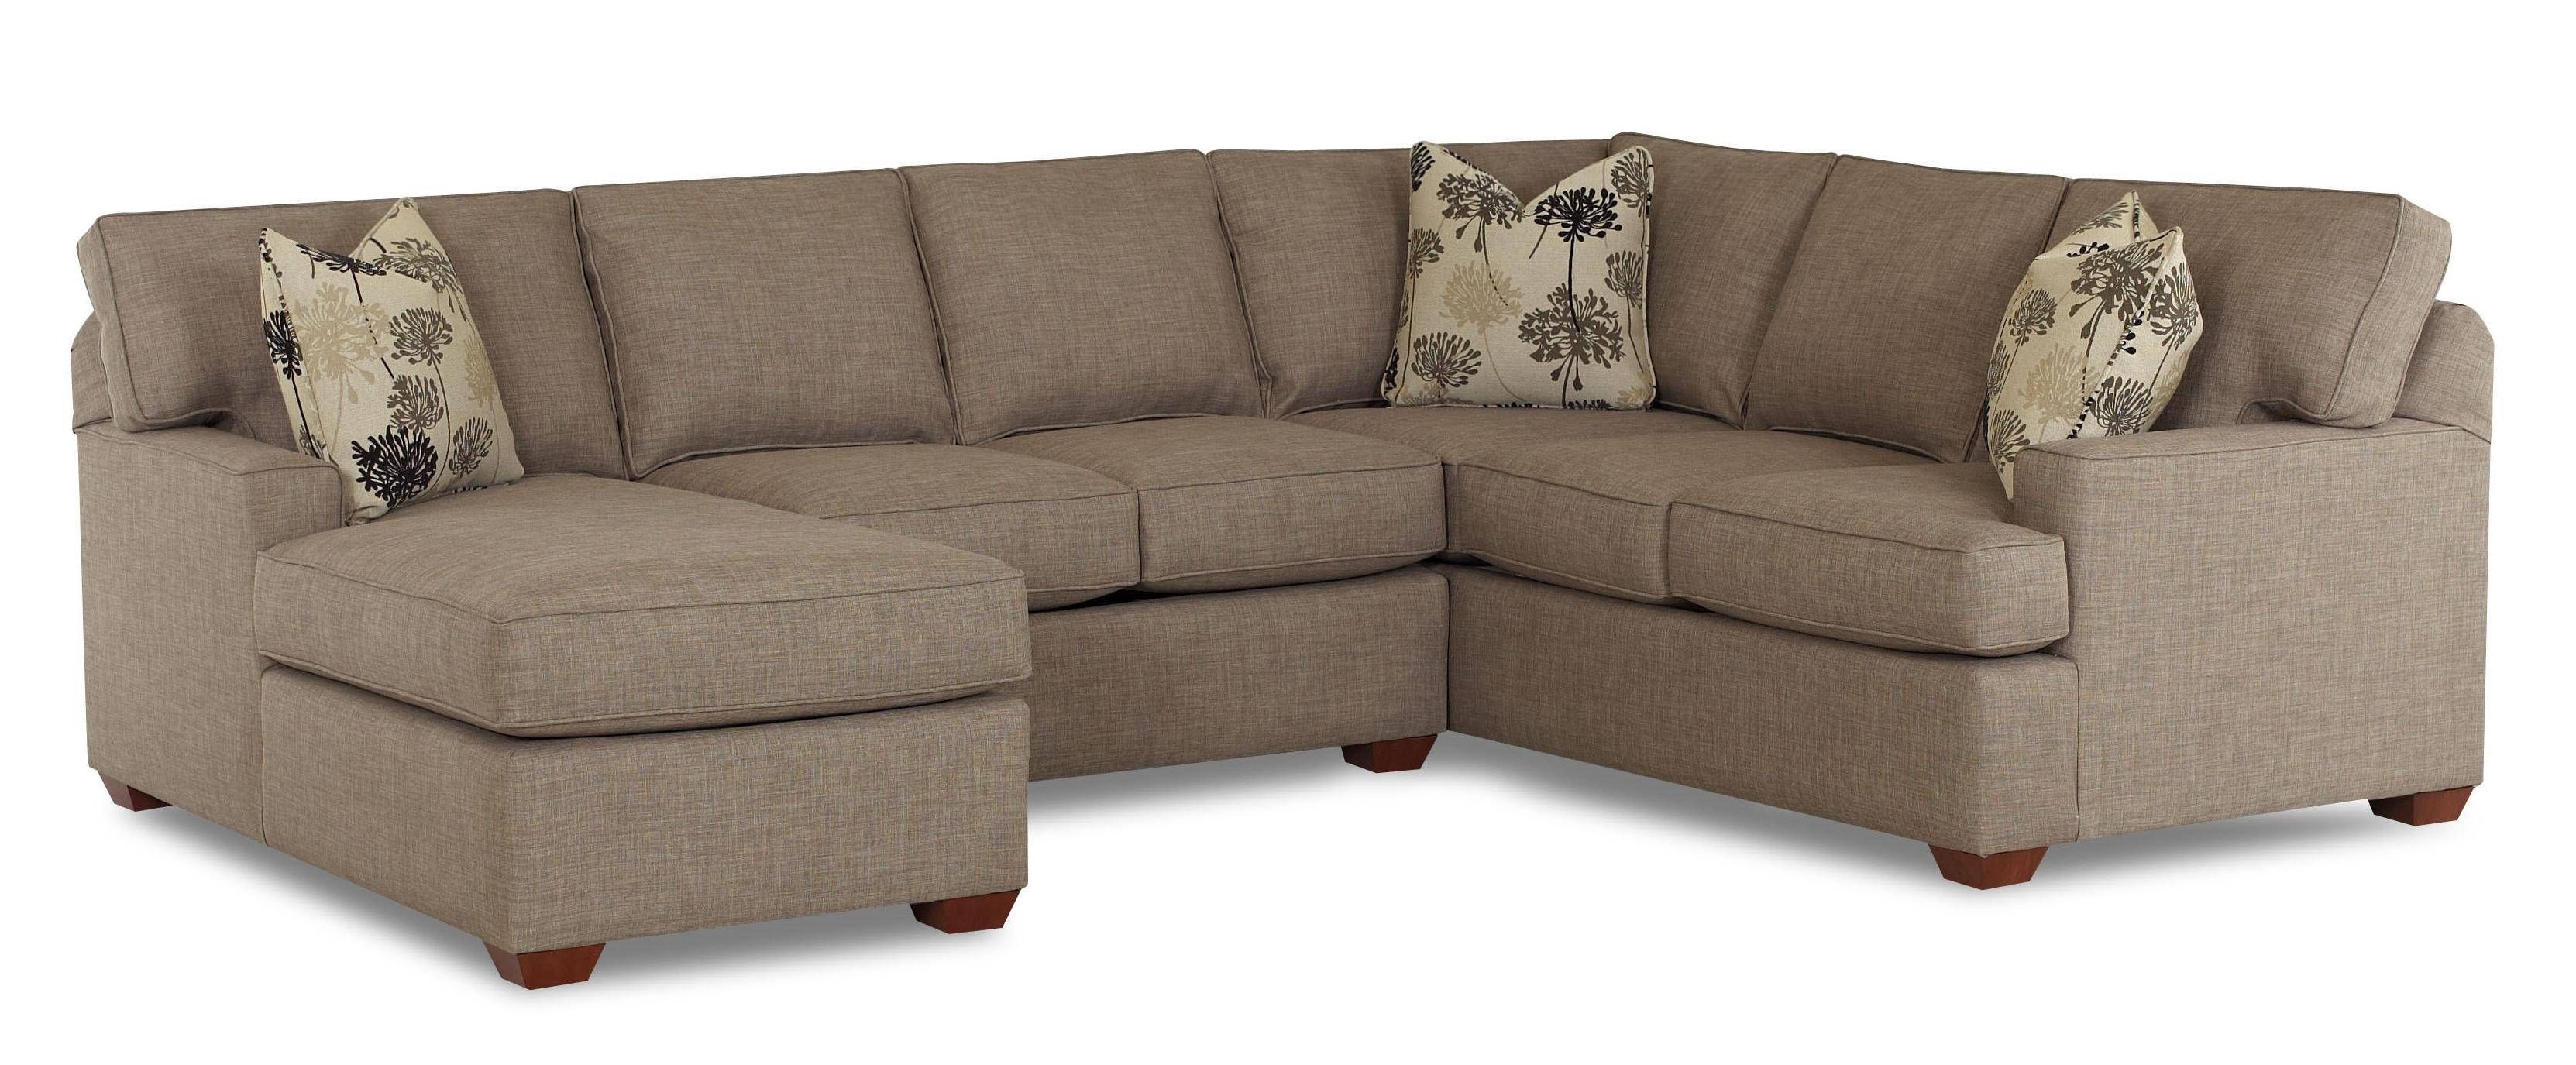 Sofas Center : Sutton Place Piece Grey Sectional Haynes Furniture Pertaining To 3 Piece Sectional Sofa Slipcovers (View 2 of 33)